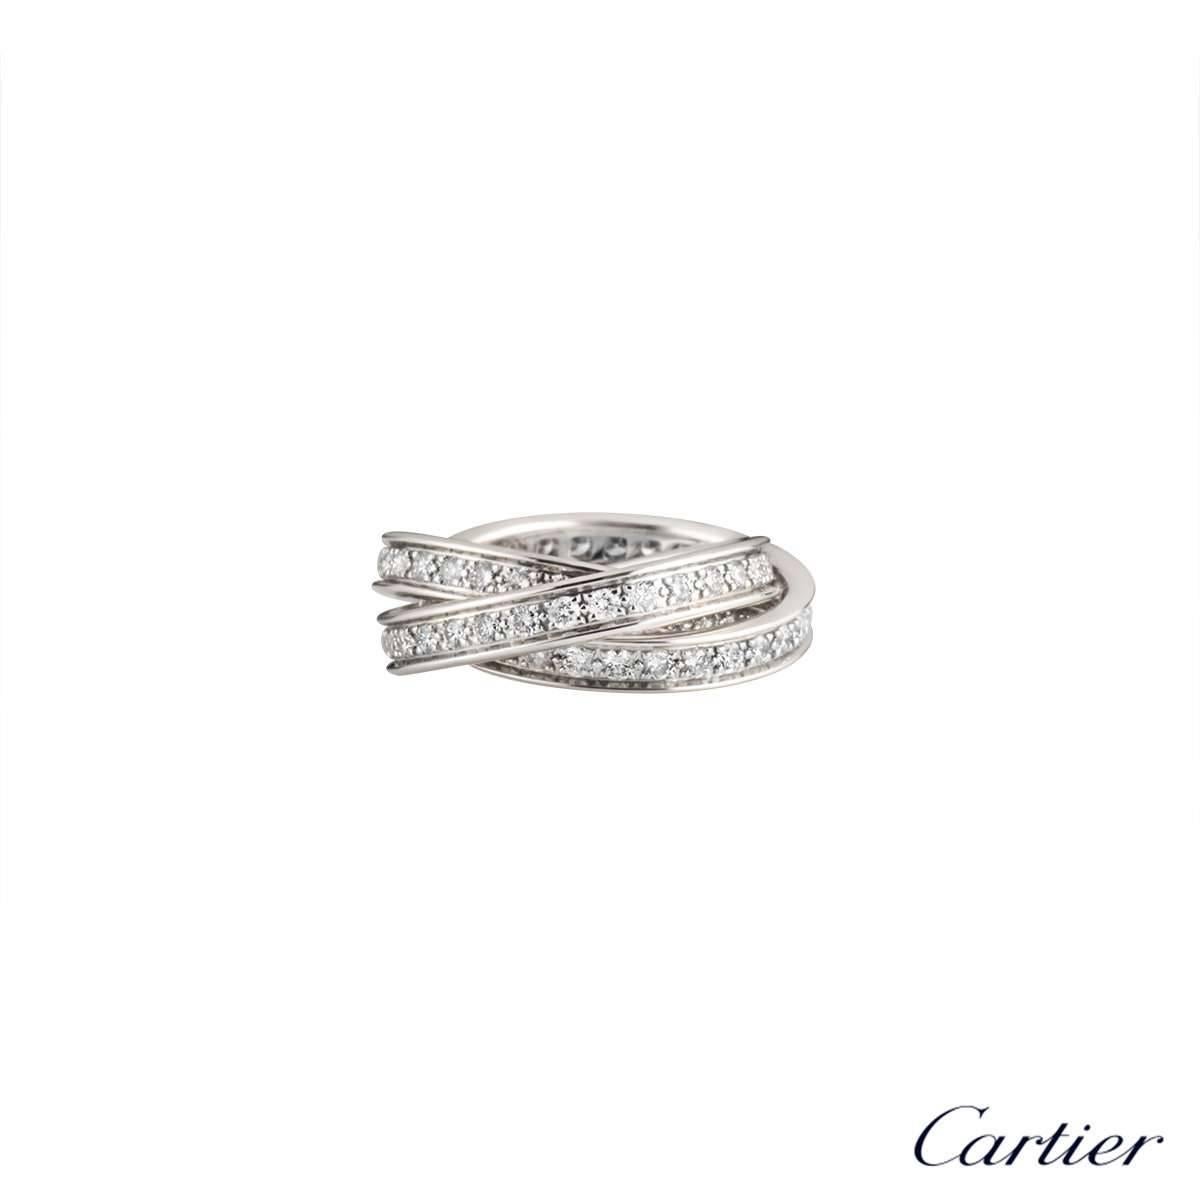 An 18k white gold diamond set ring from the Trinity de Cartier collection by Cartier. The ring is composed of three entwined round brilliant cut diamond set bands, totalling 1.55ct, G+ colour and VS+ clarity. The ring is a US 4 1/2, EU size 48 and